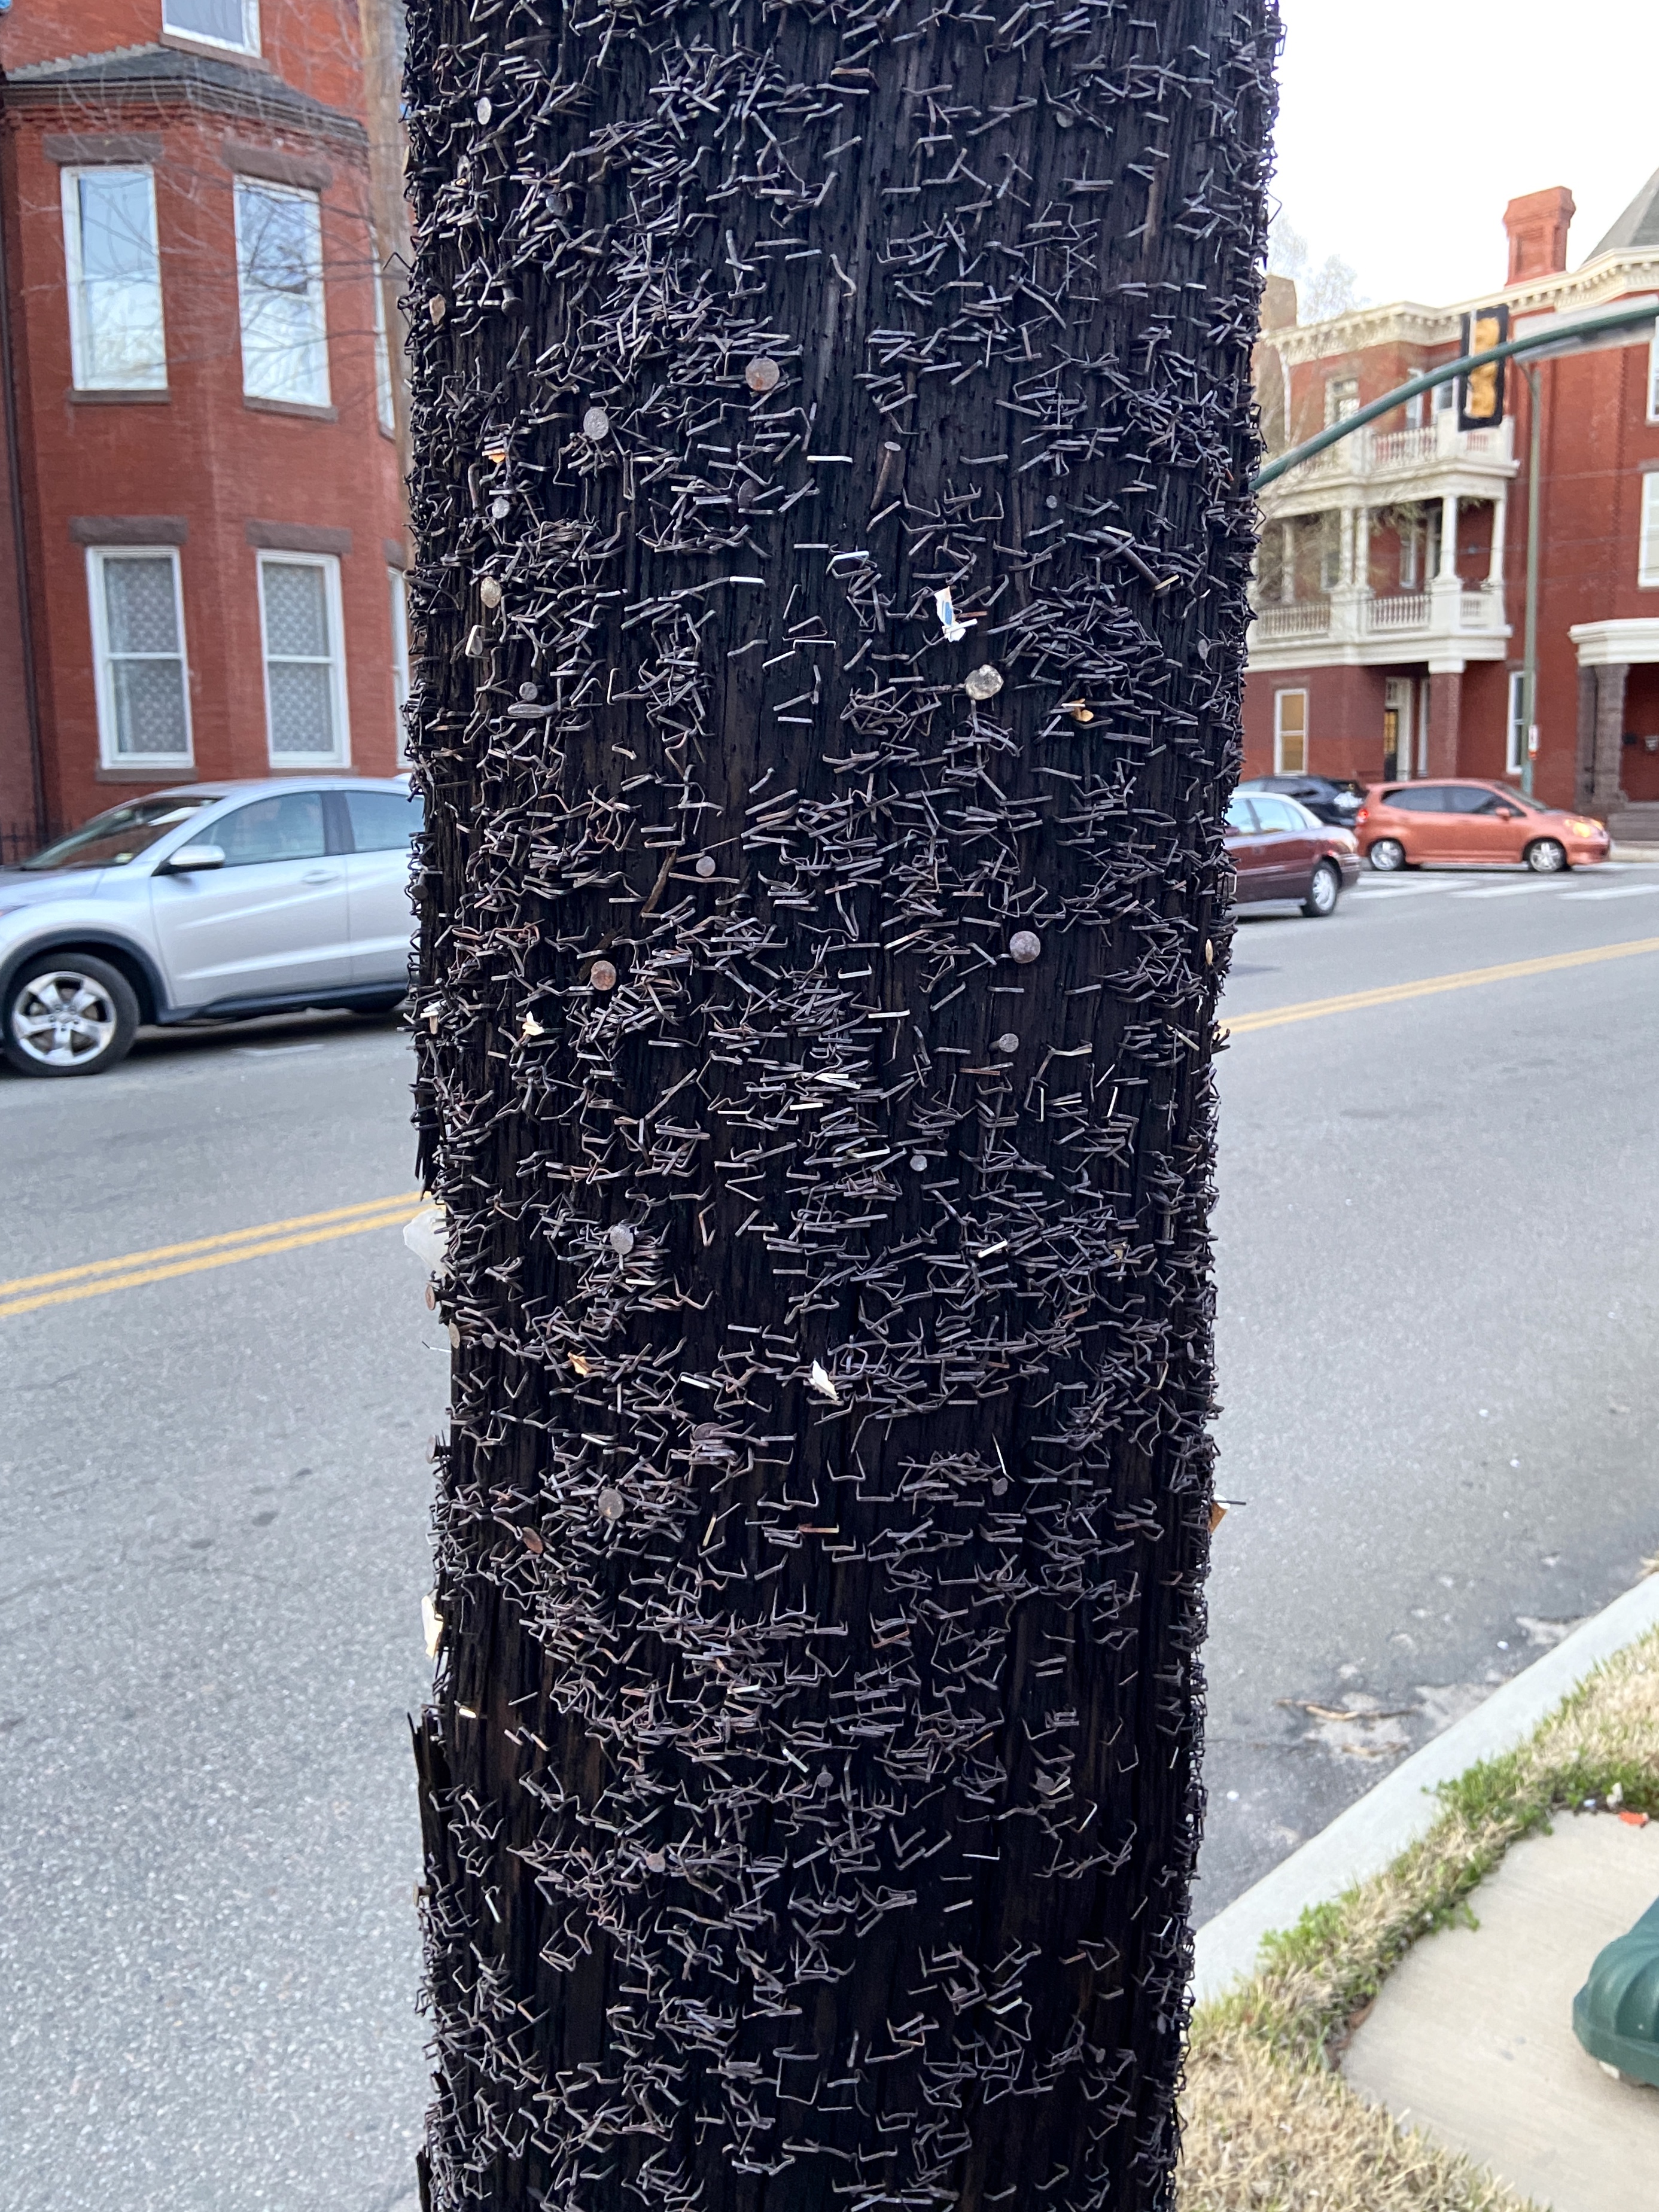 A telephone pole in Richmond, VA covered in staples.